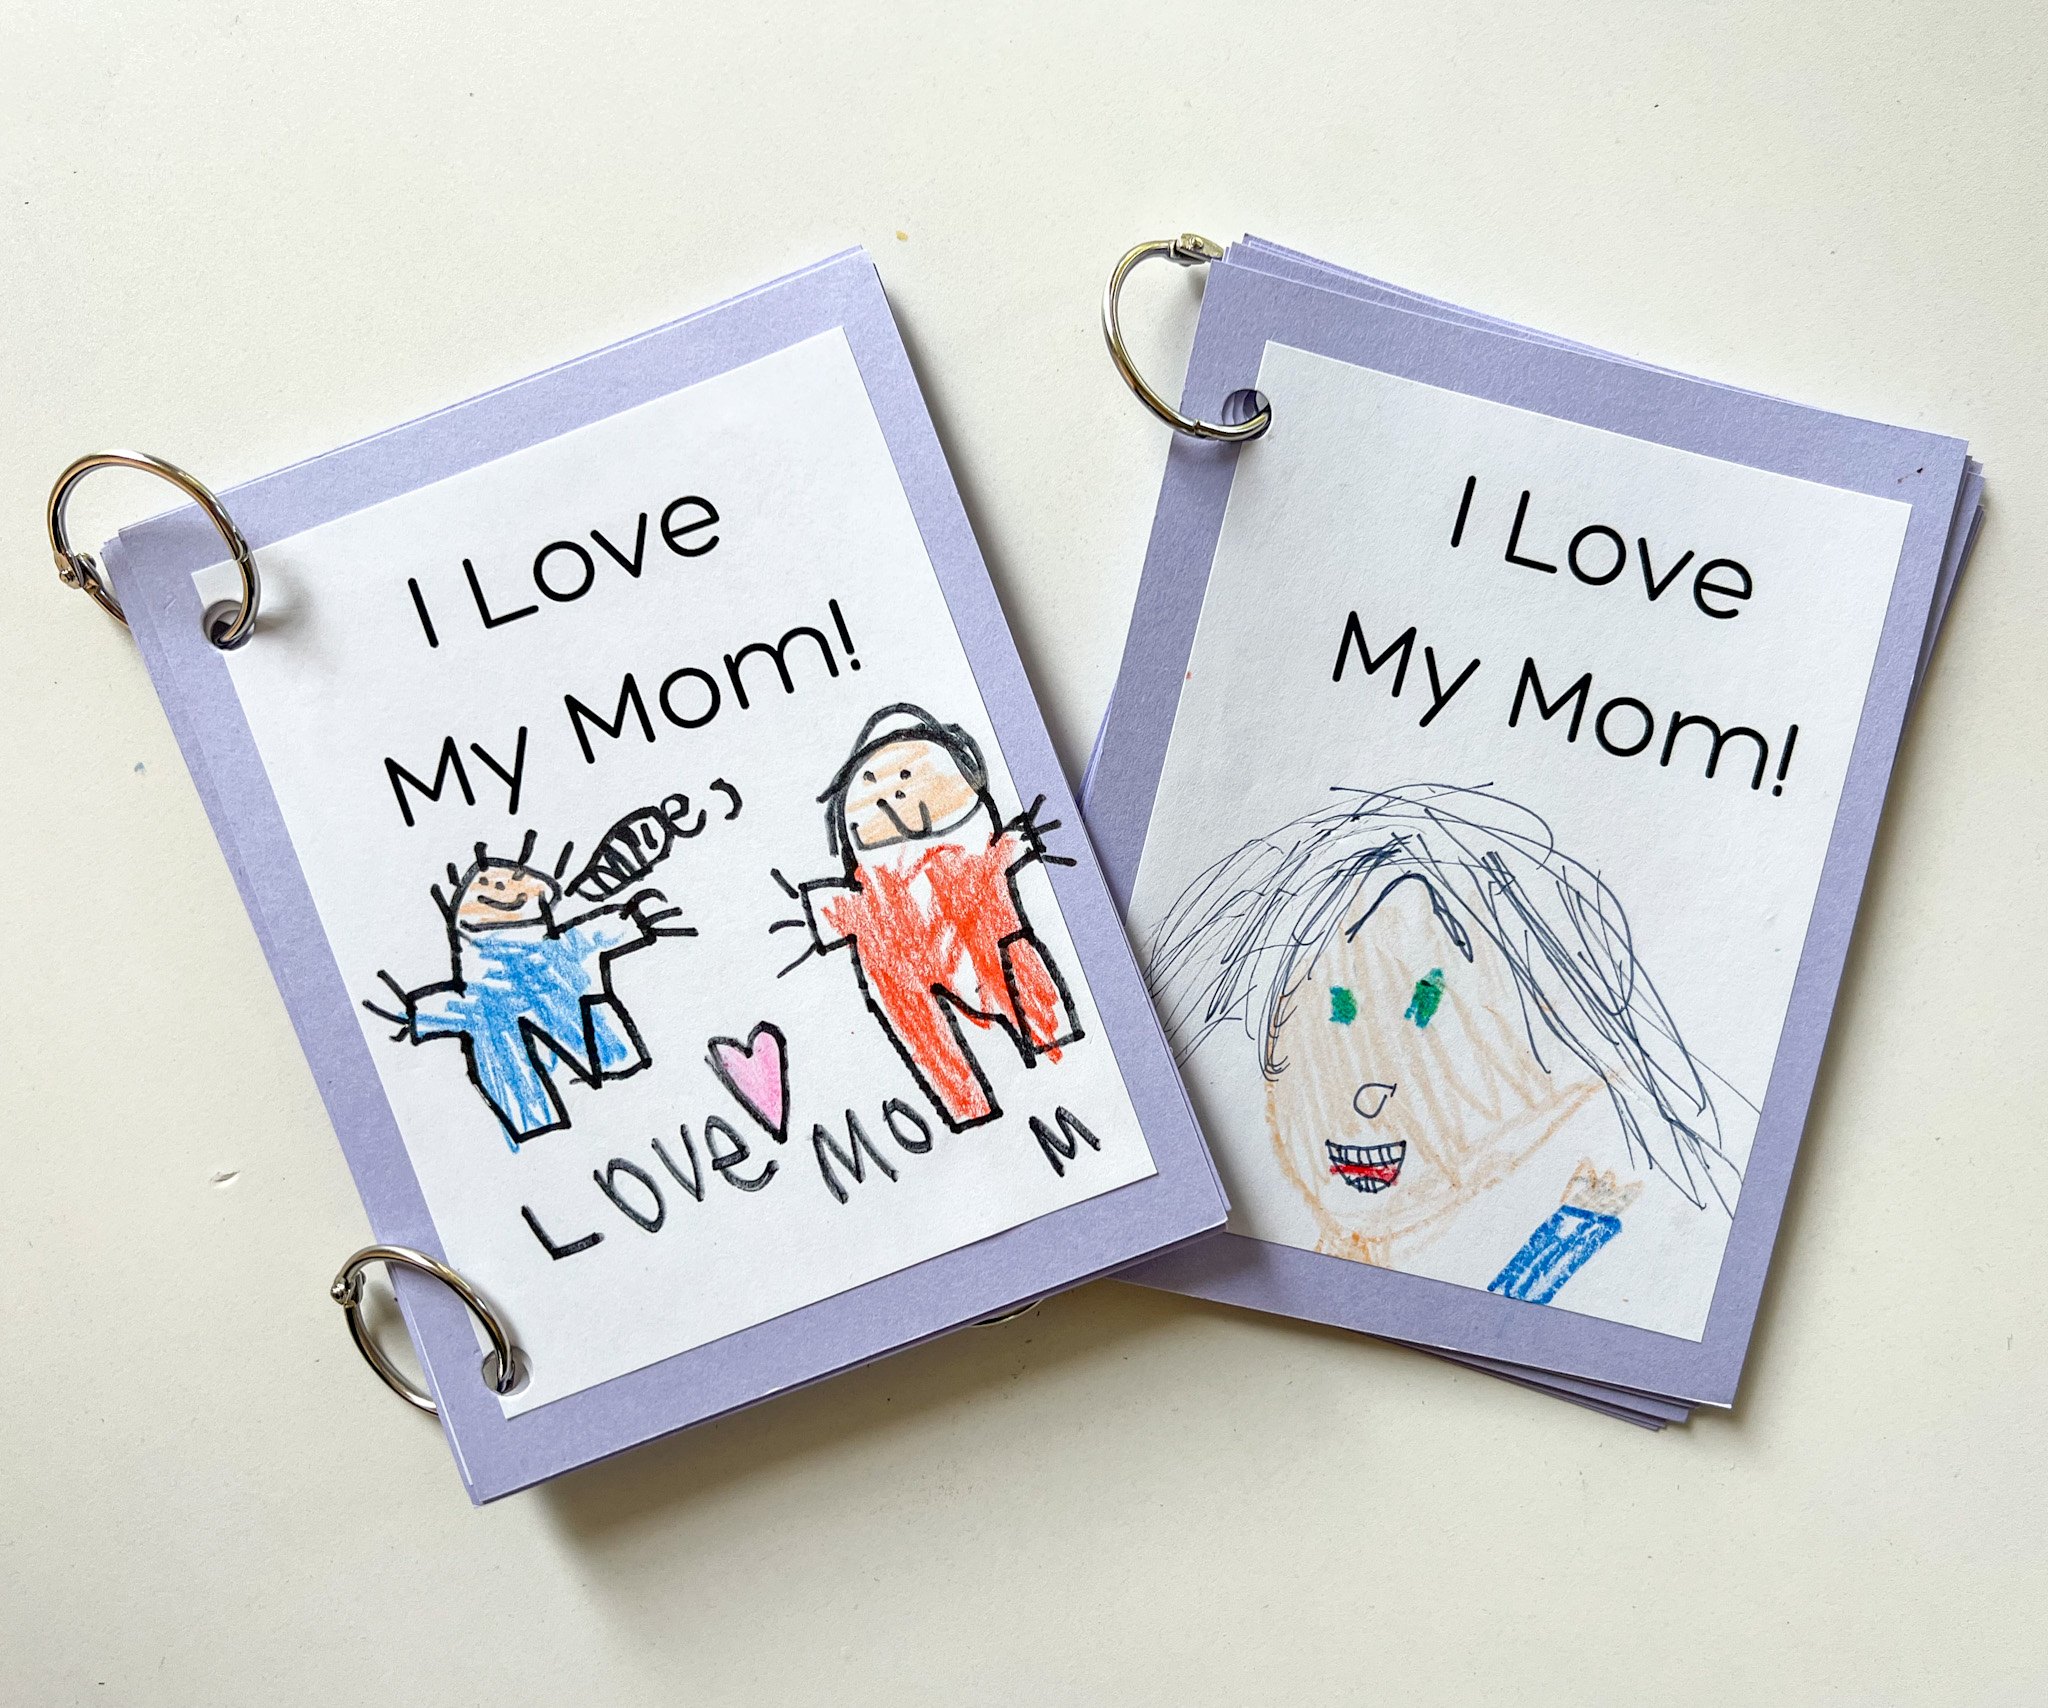 DIY Mother’s Day Gift for Grandma or Mom: how to make a free Mother’s Day booklet!